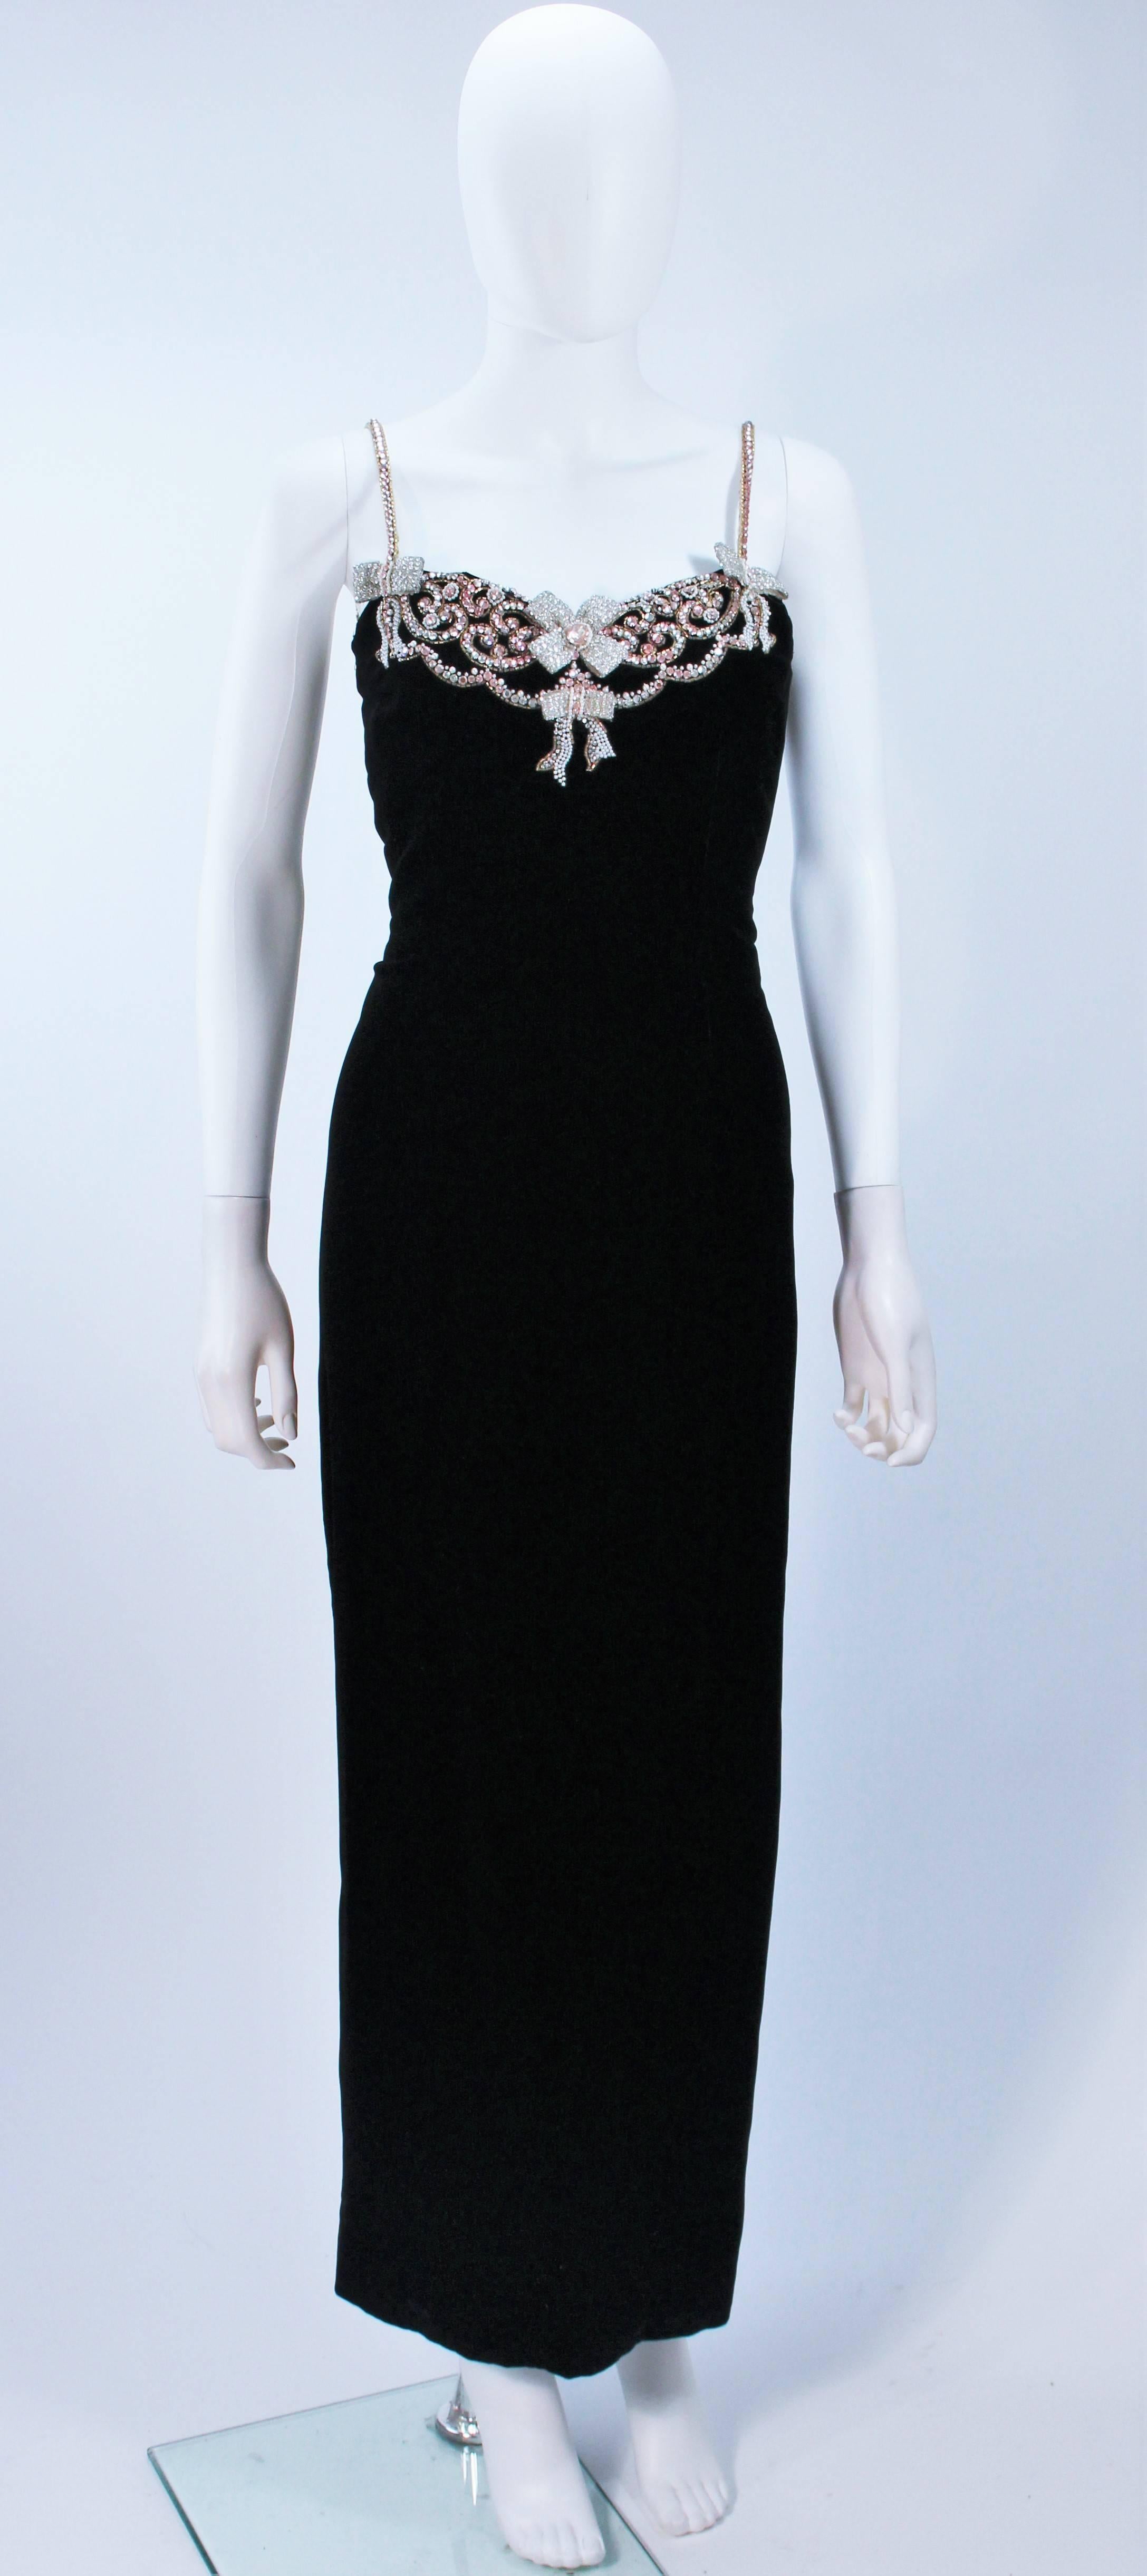  This Carolyn Roehm  gown is composed of a black velvet and features an embellished neckline with beaded straps. There is a zipper closure. In excellent vintage condition. 

  **Please cross-reference measurements for personal accuracy. Size in